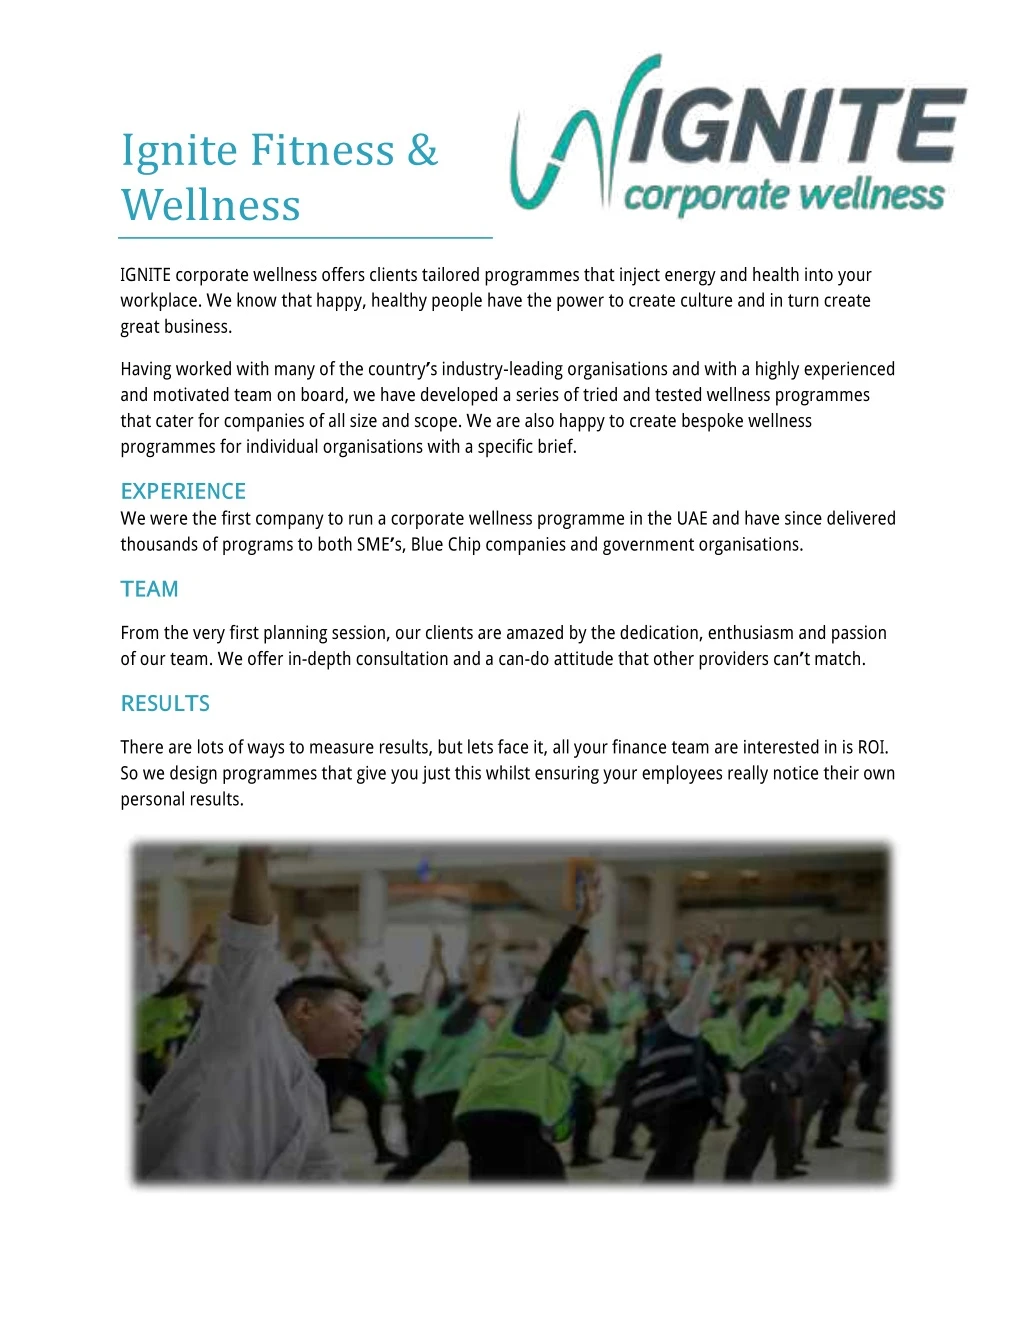 ignite corporate wellness offers clients tailored